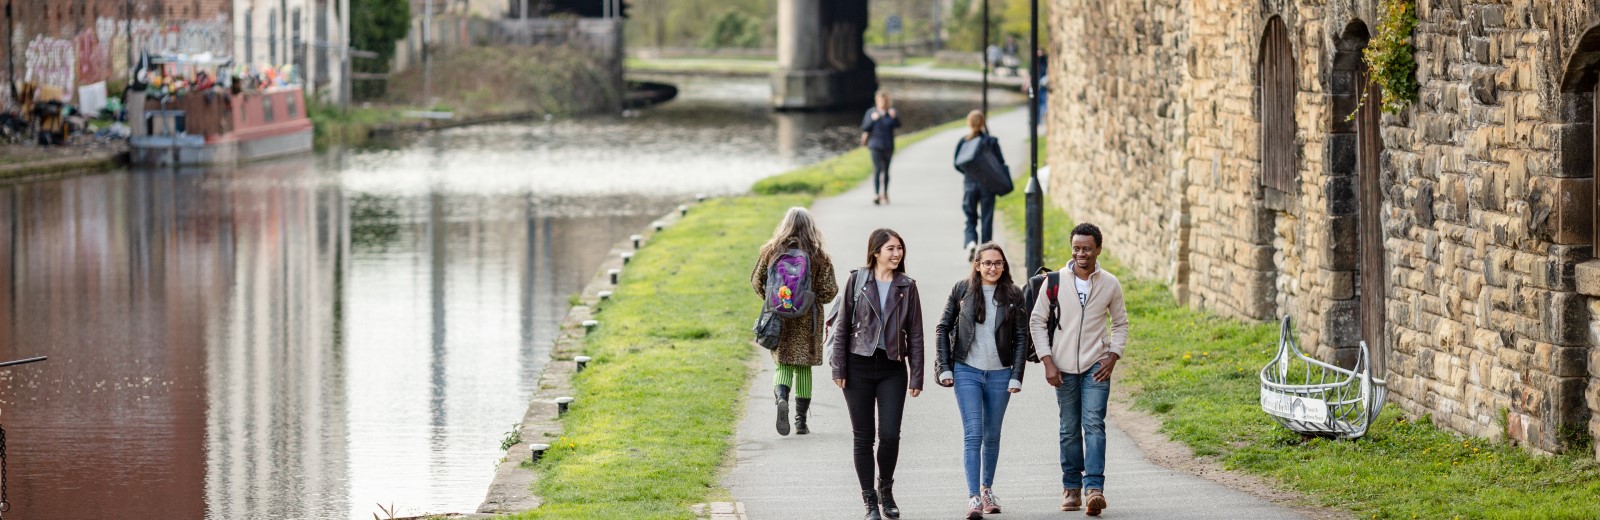 Students by the canal in Leeds